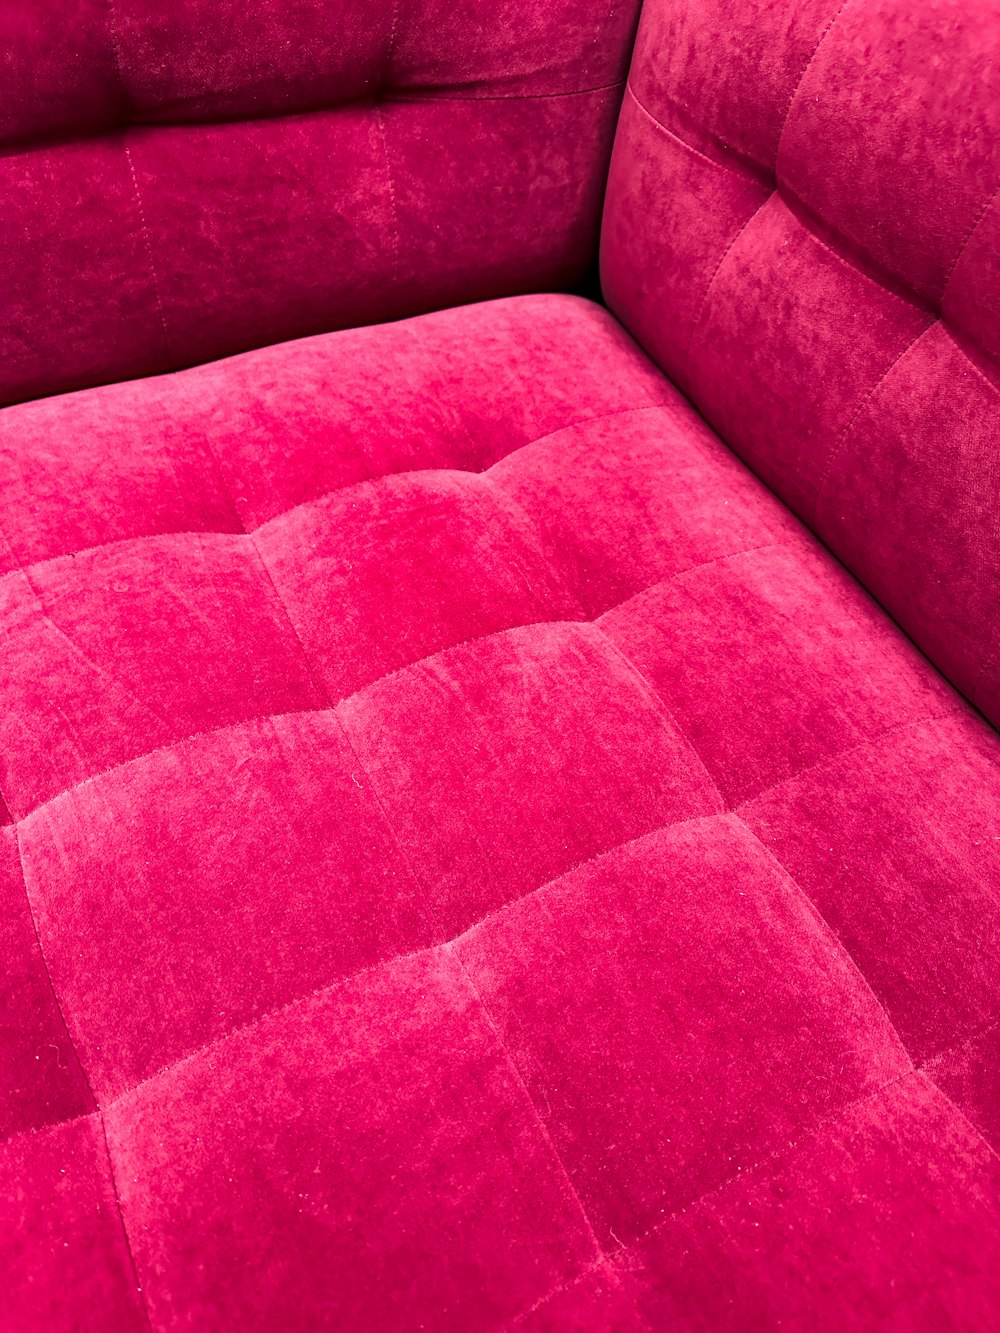 a fuchsia colored couch is shown in this image